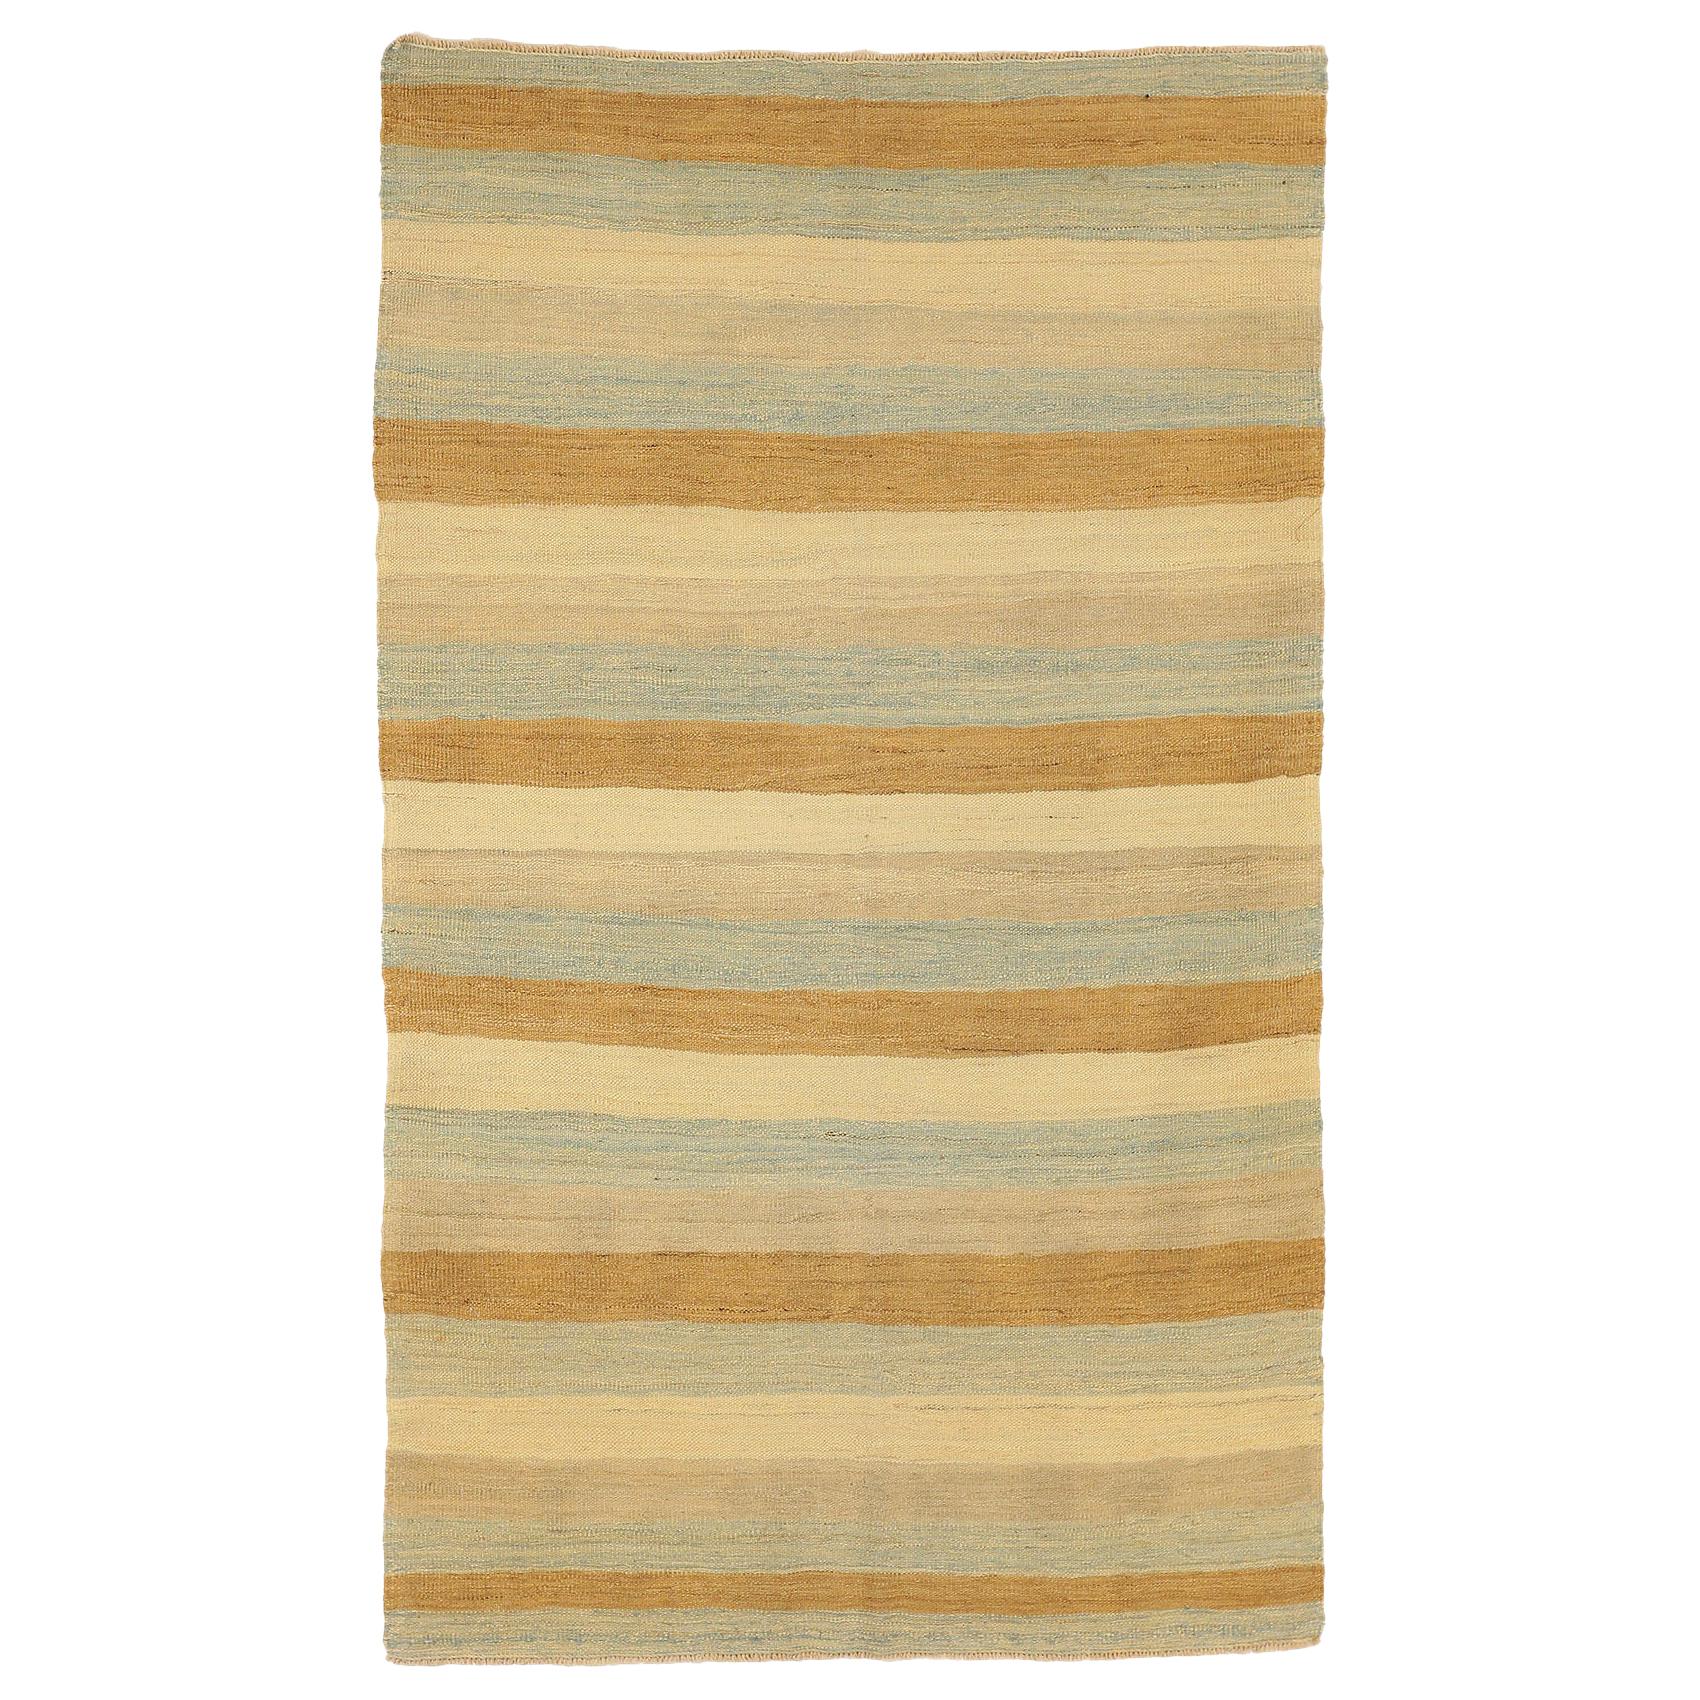 New Turkish Kilim Rug with an Ivory Field of Blue and Brown Stripes